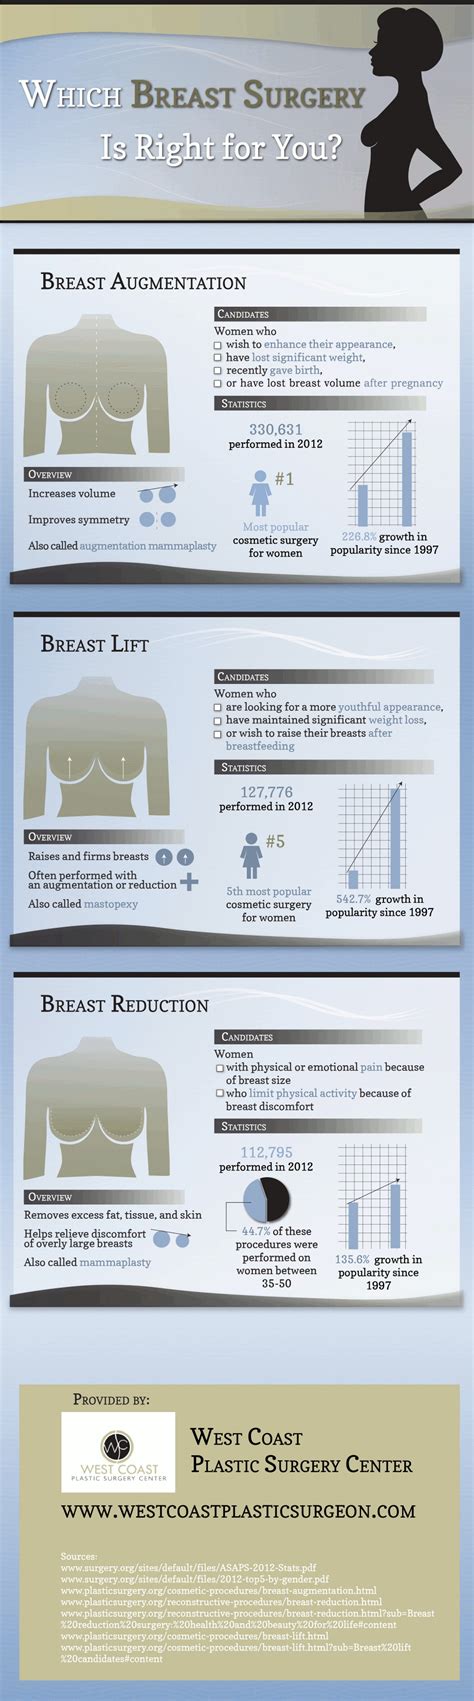 Breast Reduction Pros And Cons HRF